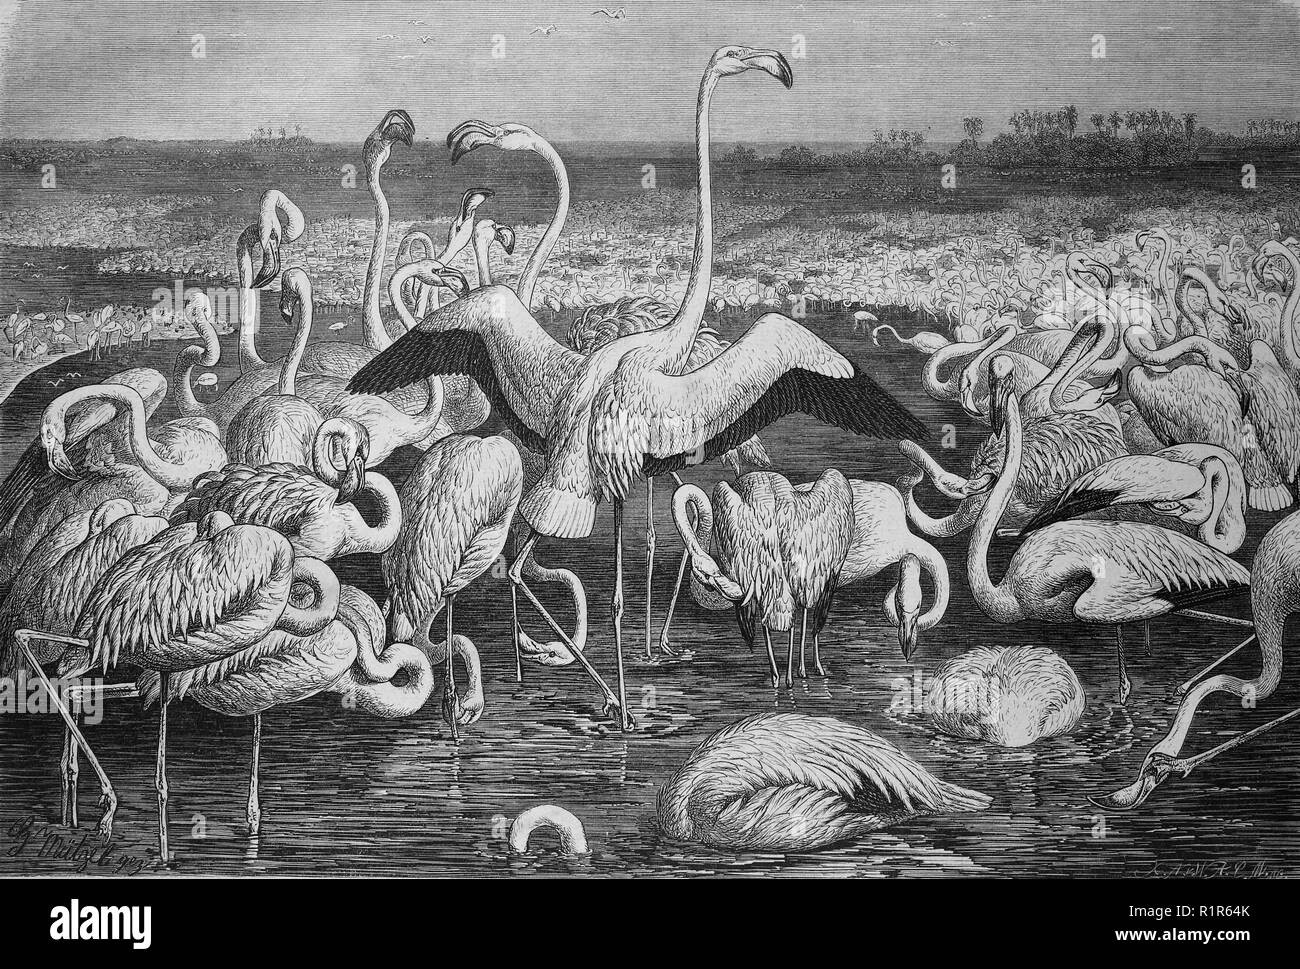 Digital improved reproduction, Flamingos or flamingoes, a type of wading bird in the family Phoenicopteridae, original print from the year 1880 Stock Photo